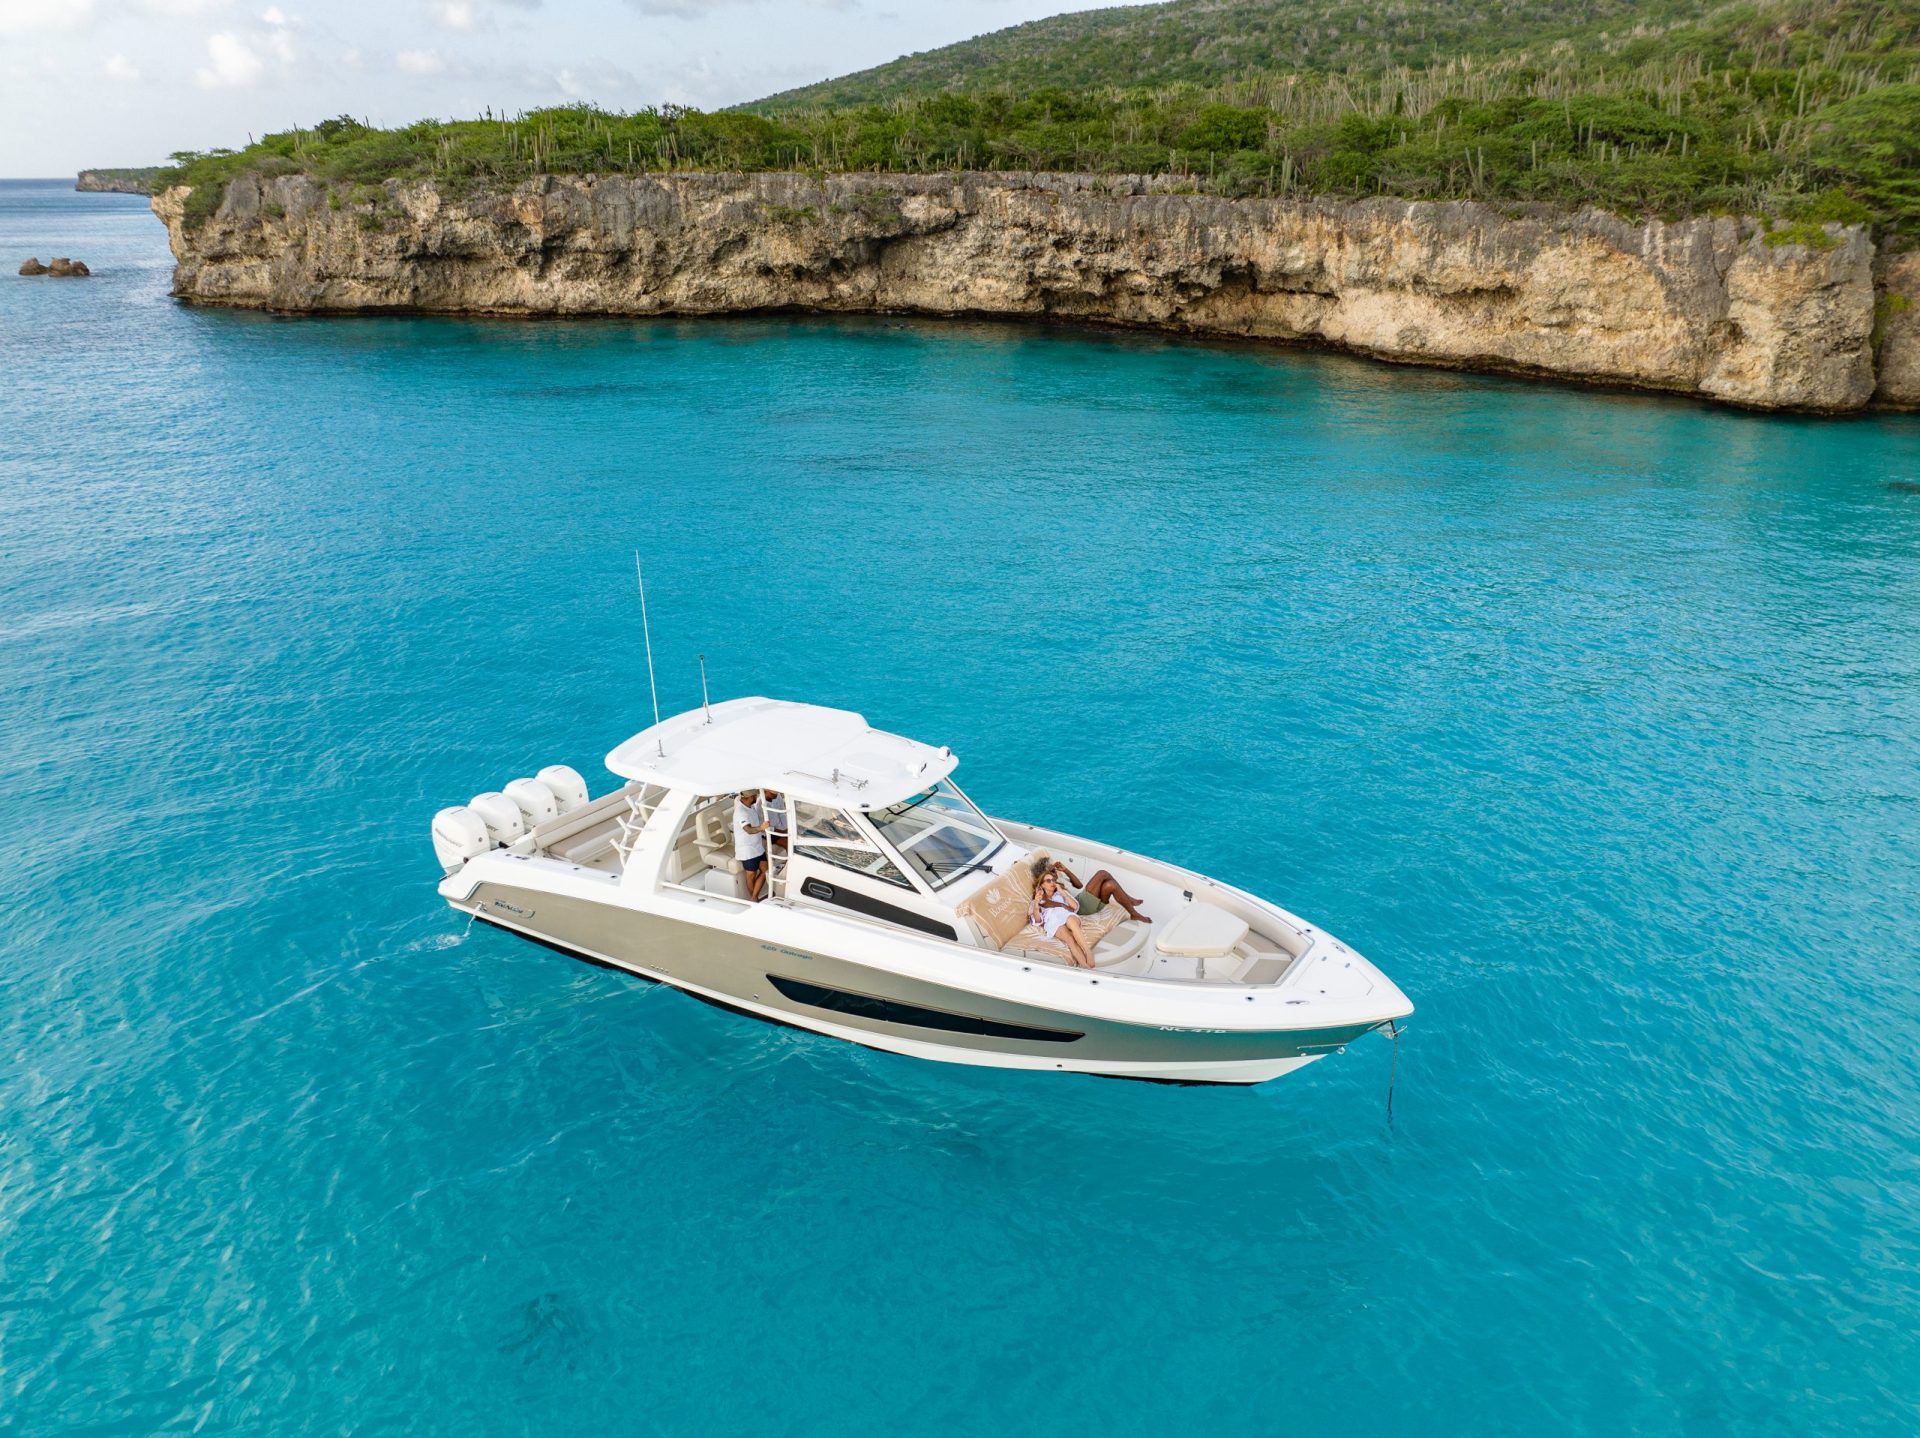 A yacht driving on the water